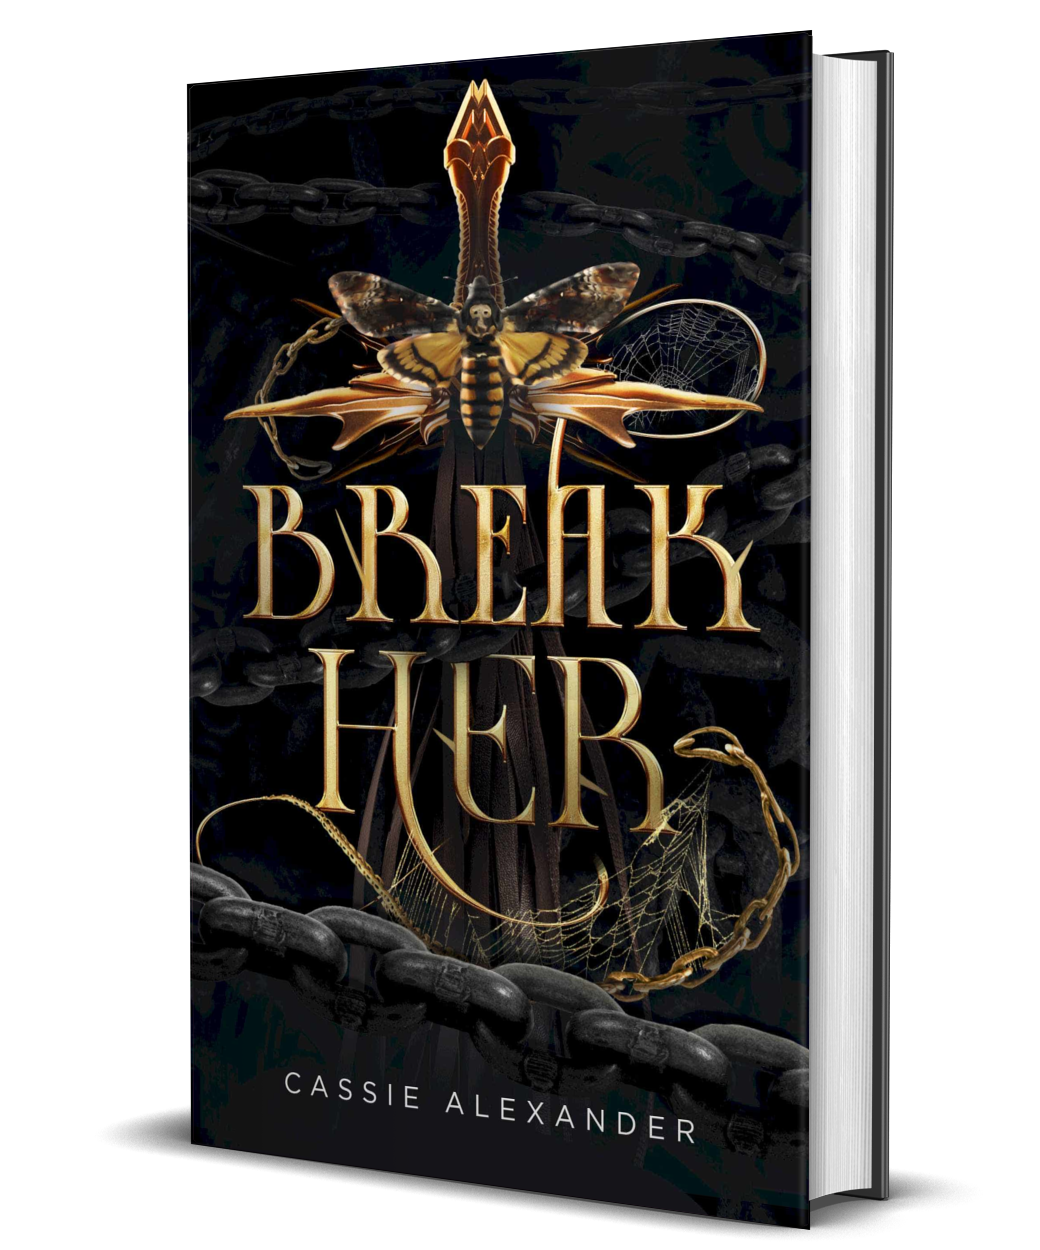 Hardcover cover of Break Her by Cassie Alexander. "Break Her" title in gold letters with a moth on a whip and spider webs and chains surrounding. Colors are black and gold.